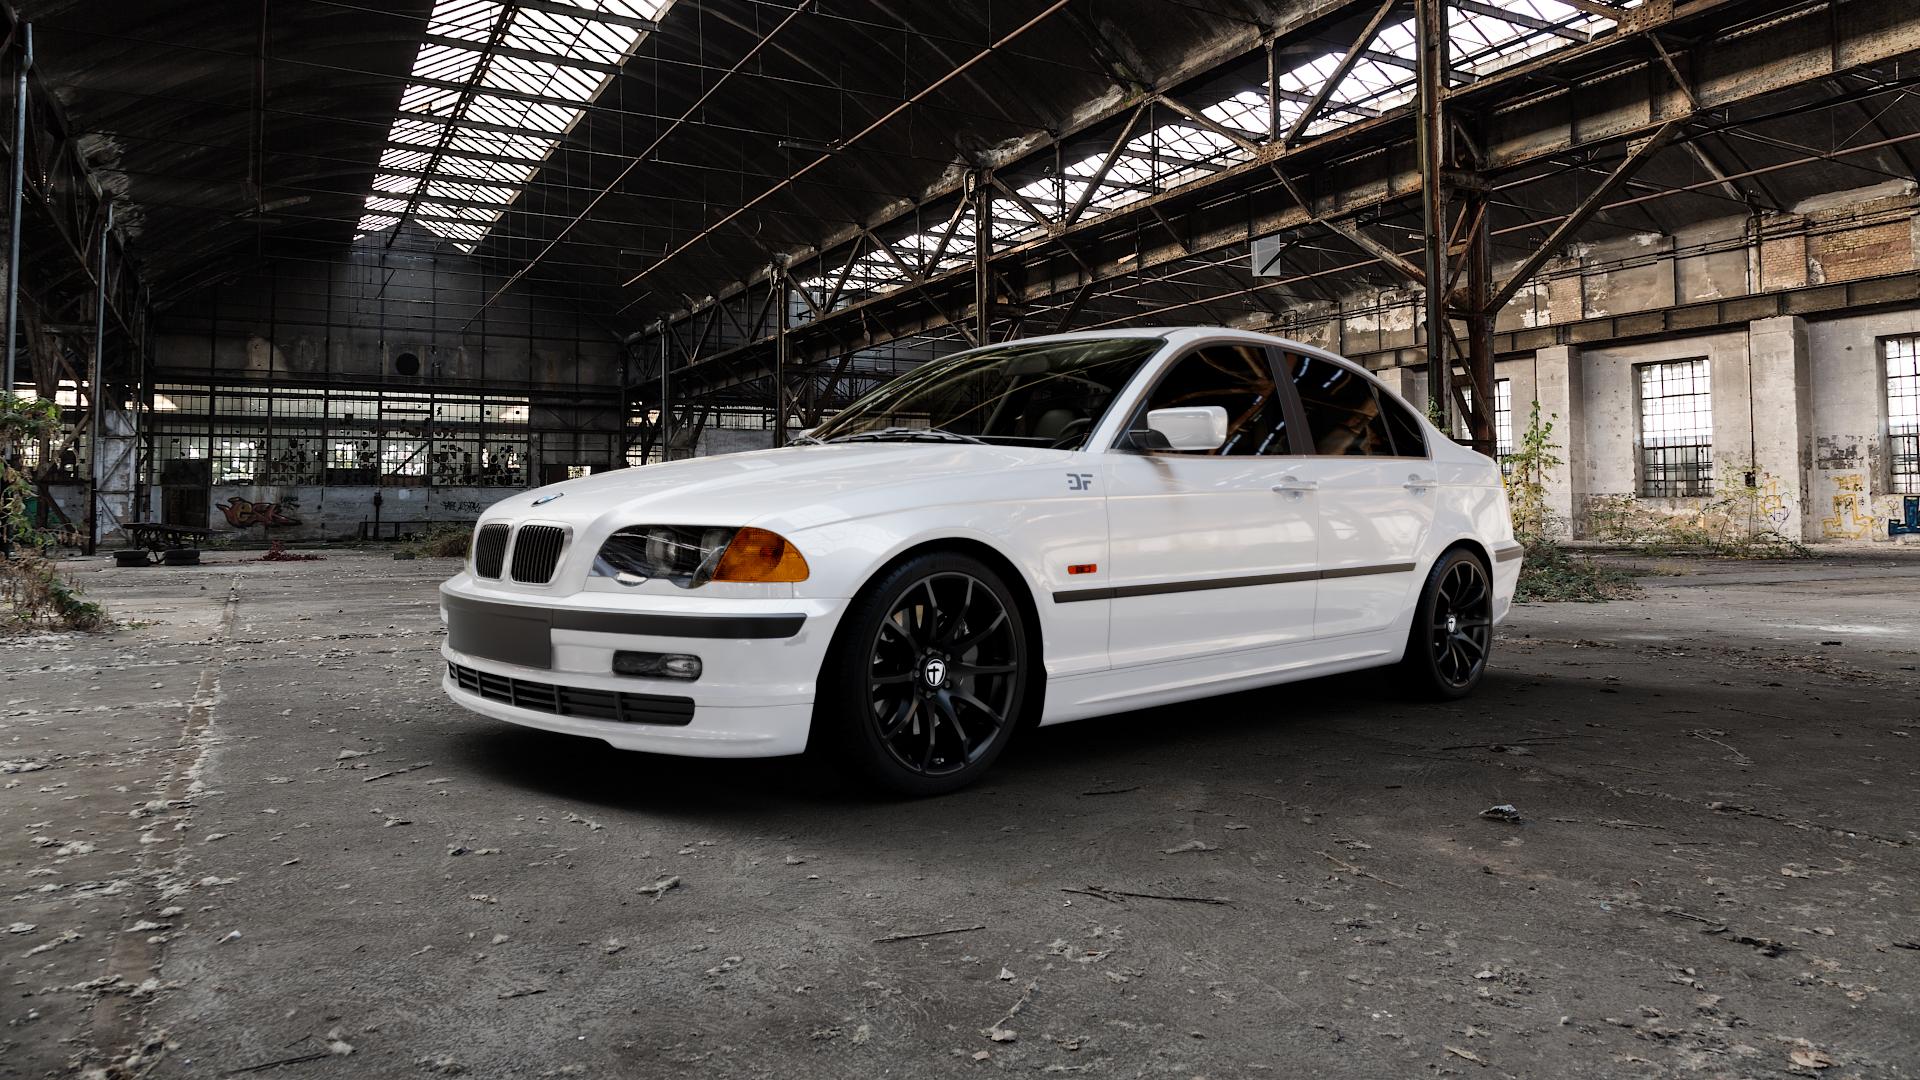 BMW 316i Type E46 (Limousine) 1,6l 85kW (116 hp) Wheels and Tyre Packages